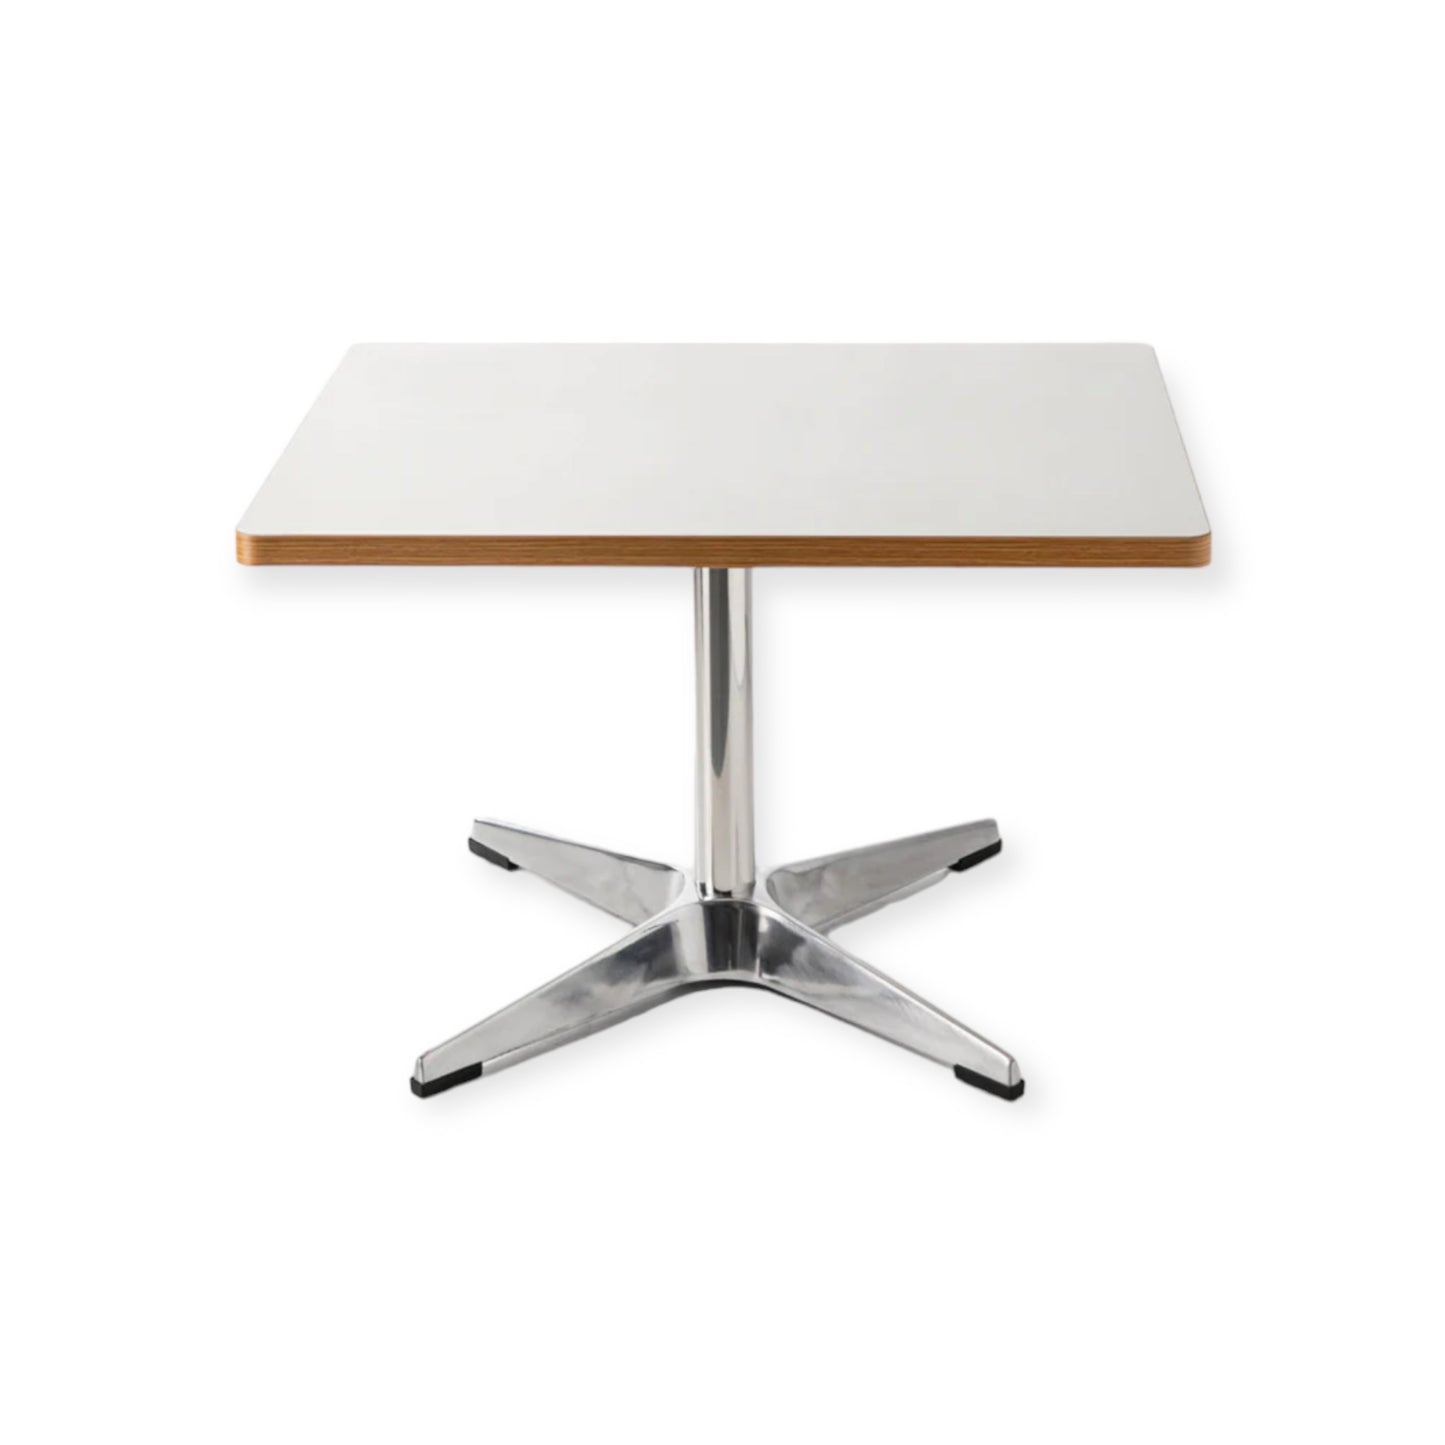 Selectable sizes Square low table